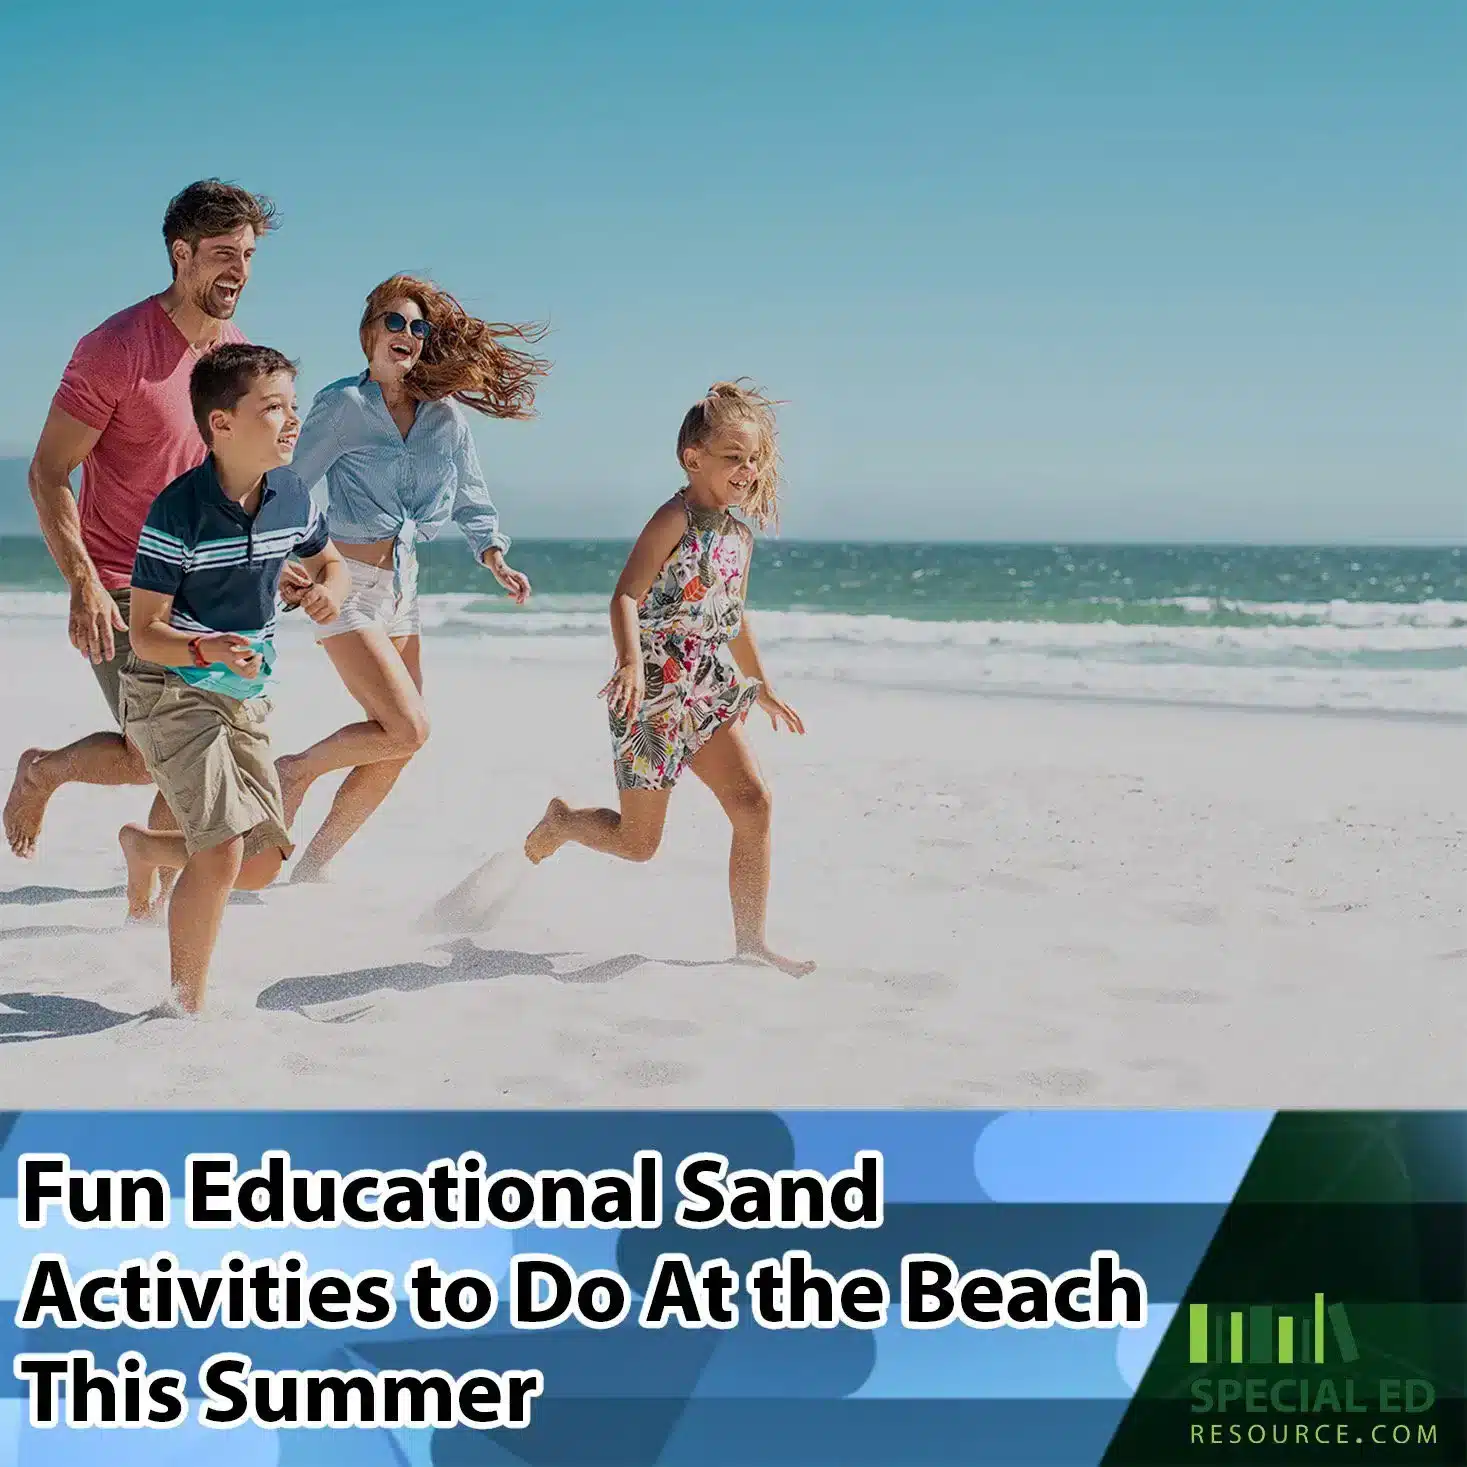 Family running on the beach looking for fun educational sand activities to do at the beach this summer.